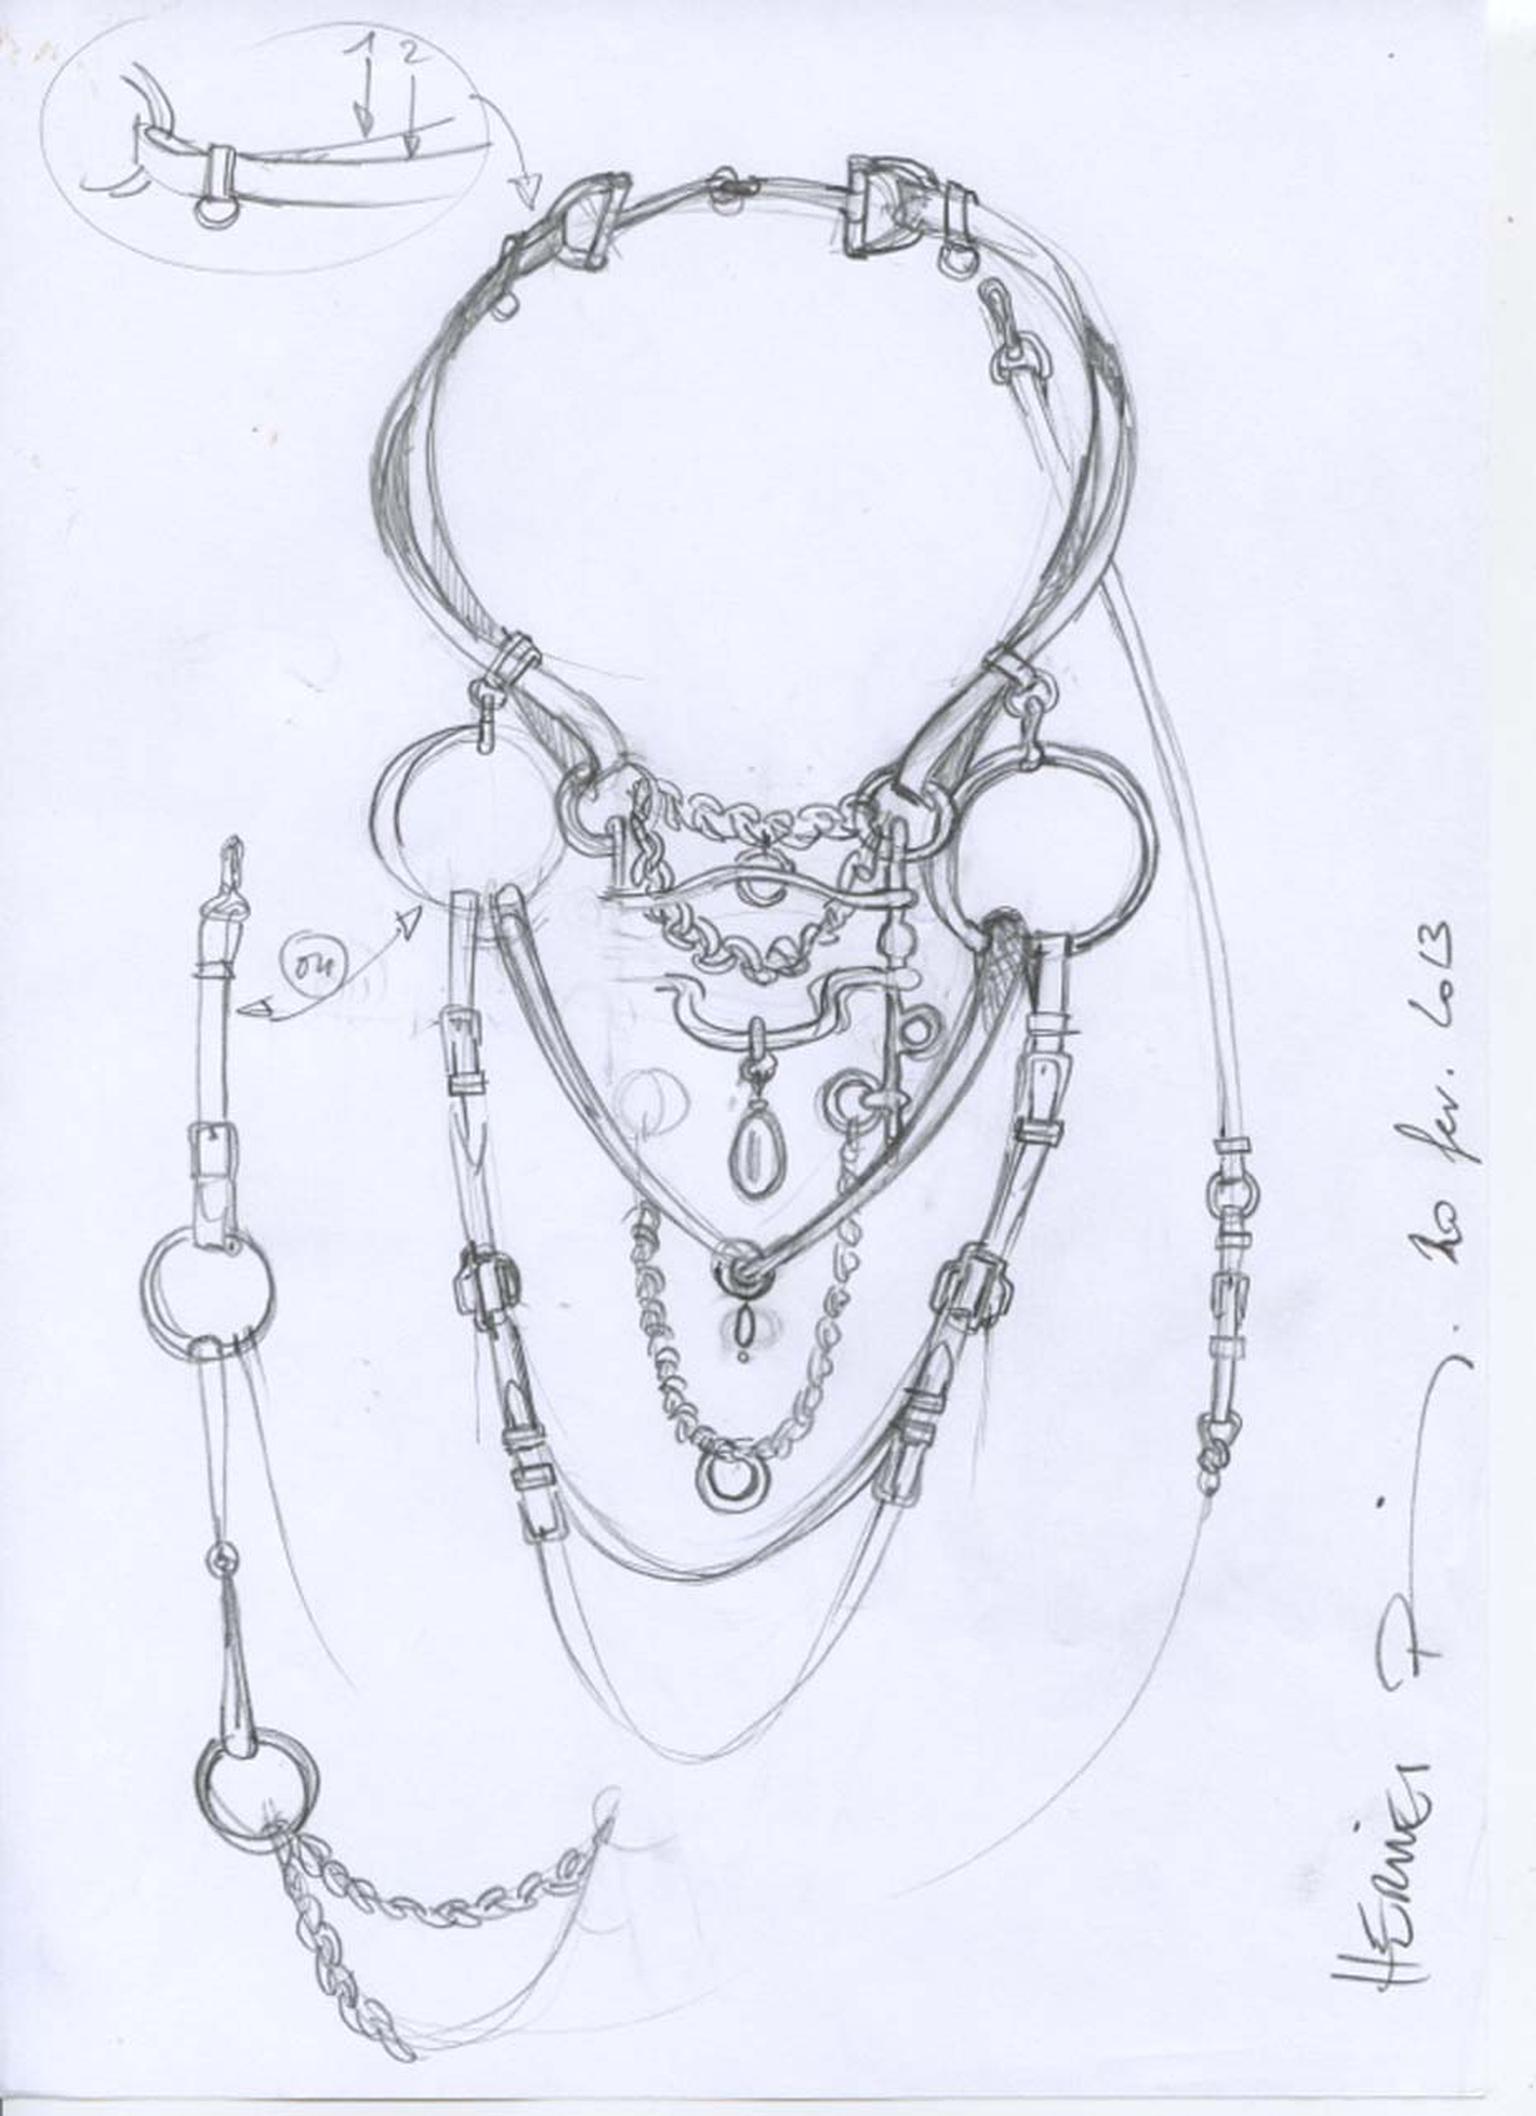 The strong equine theme is obvious in Pierre Hardy's sketch of the new Hermès Brides de Gala jewels.